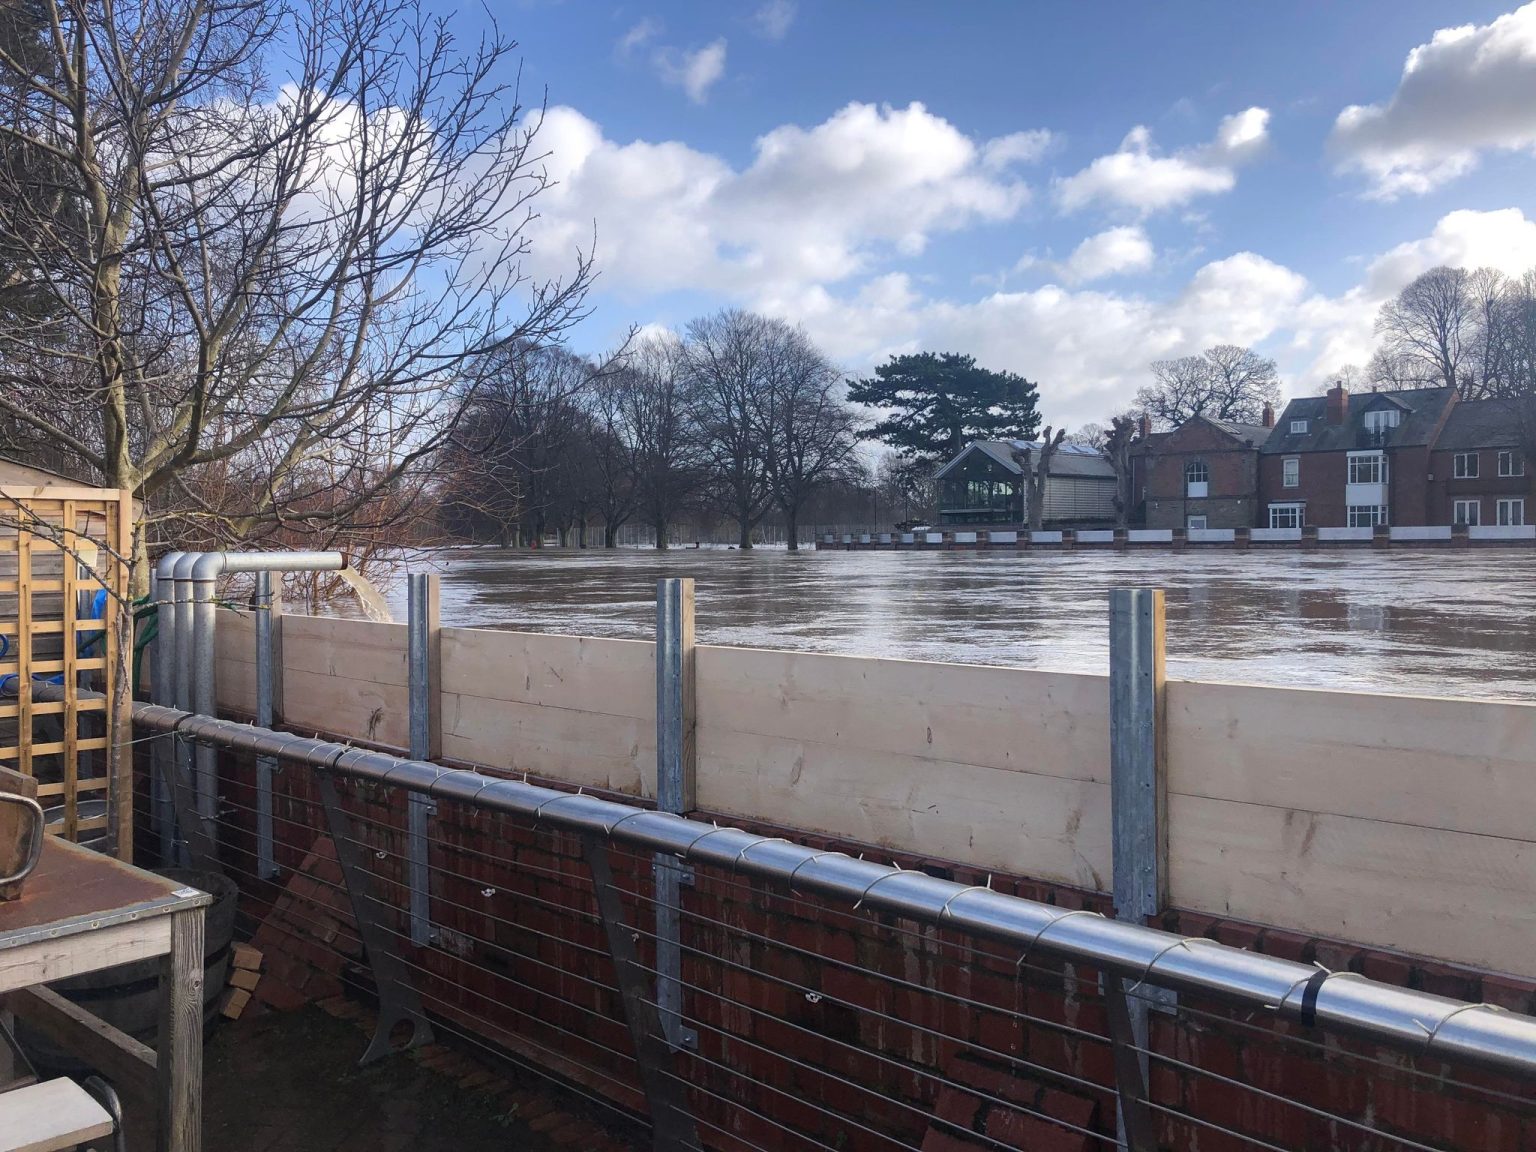 NEWS | De Koffie Pot and Left Bank remain dry despite the River Wye reaching levels of 5.4 metres